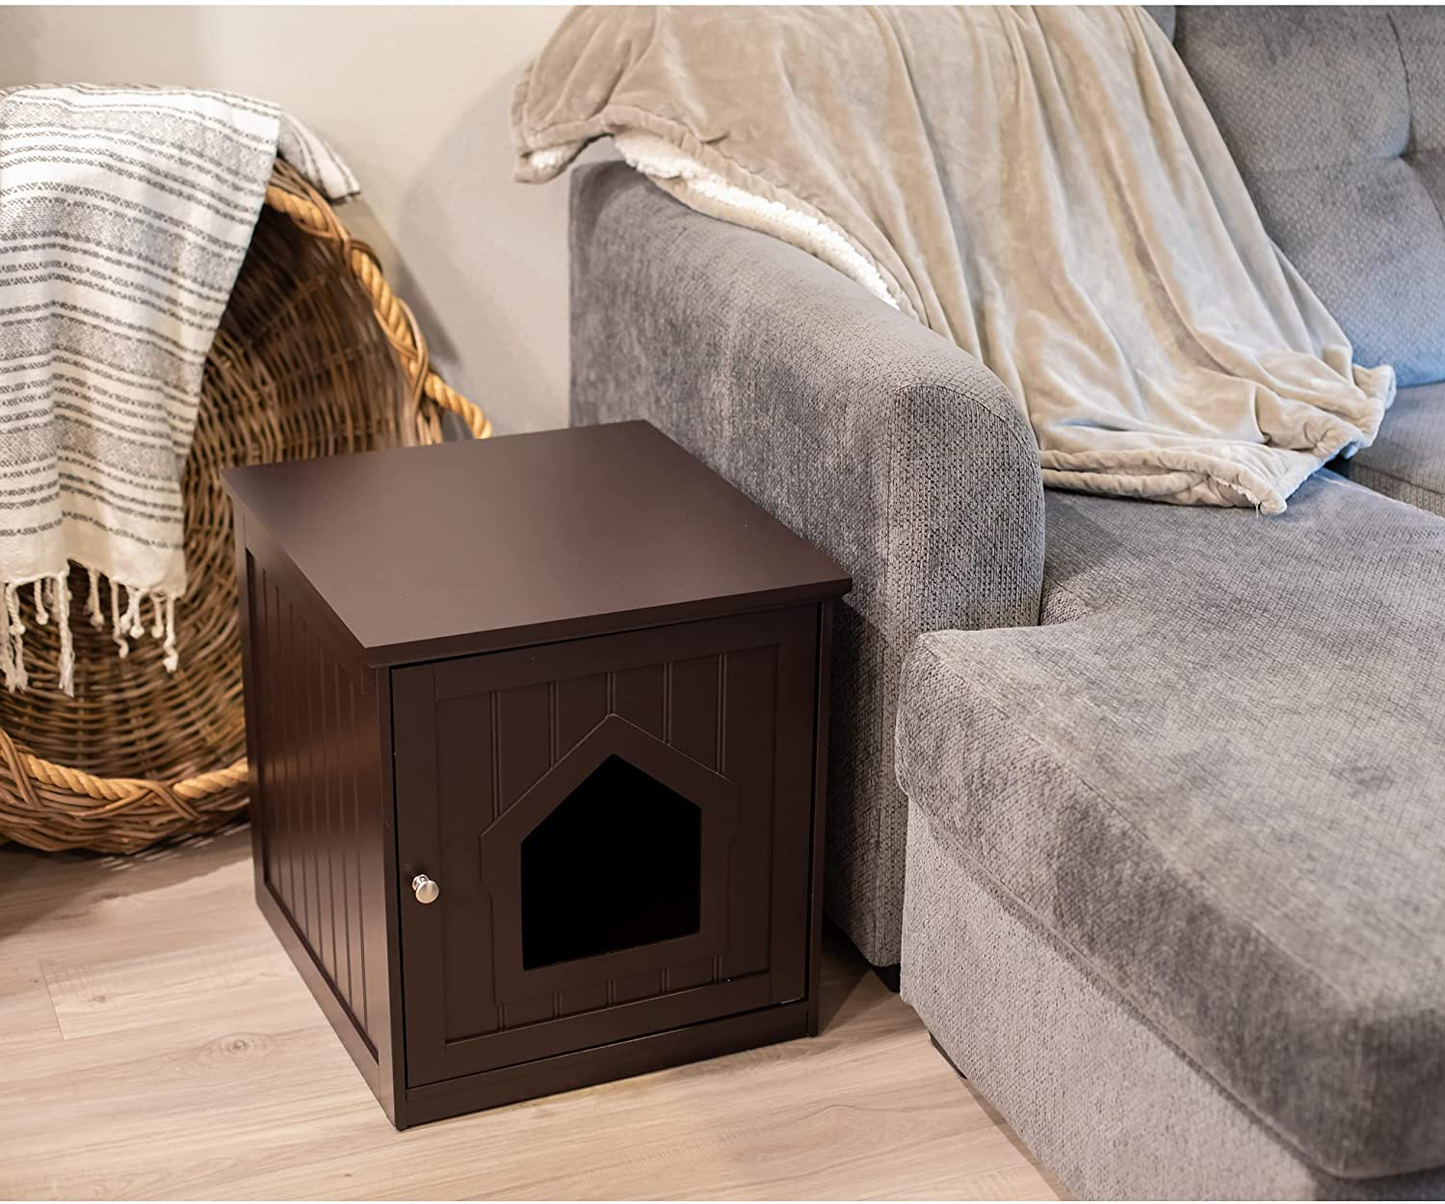 Birdrock Home Decorative Cat House & Side Table - Cat Home Covered Nightstand - Indoor Pet Crate - Litter Box Enclosure - Hooded Hidden Pet Box - Cats Furniture Cabinet - Kitty Washroom Animals & Pet Supplies > Pet Supplies > Cat Supplies > Cat Furniture BIRDROCK HOME   